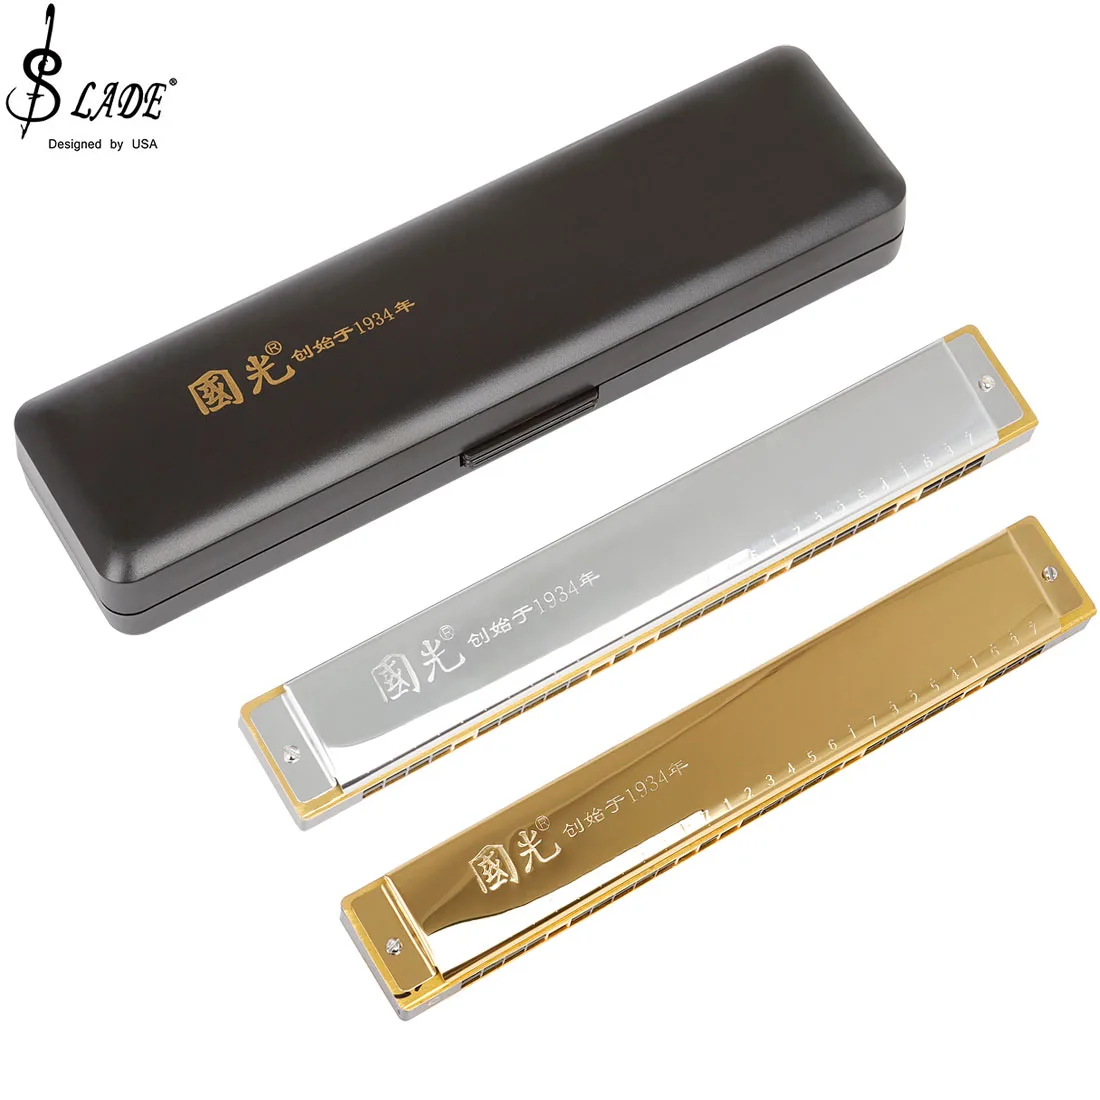 

Guoguang 28 Hole Harmonica Polyphony Accent C Harmonica Students Beginners Professional Performce Harmonica Woodwind Instruments